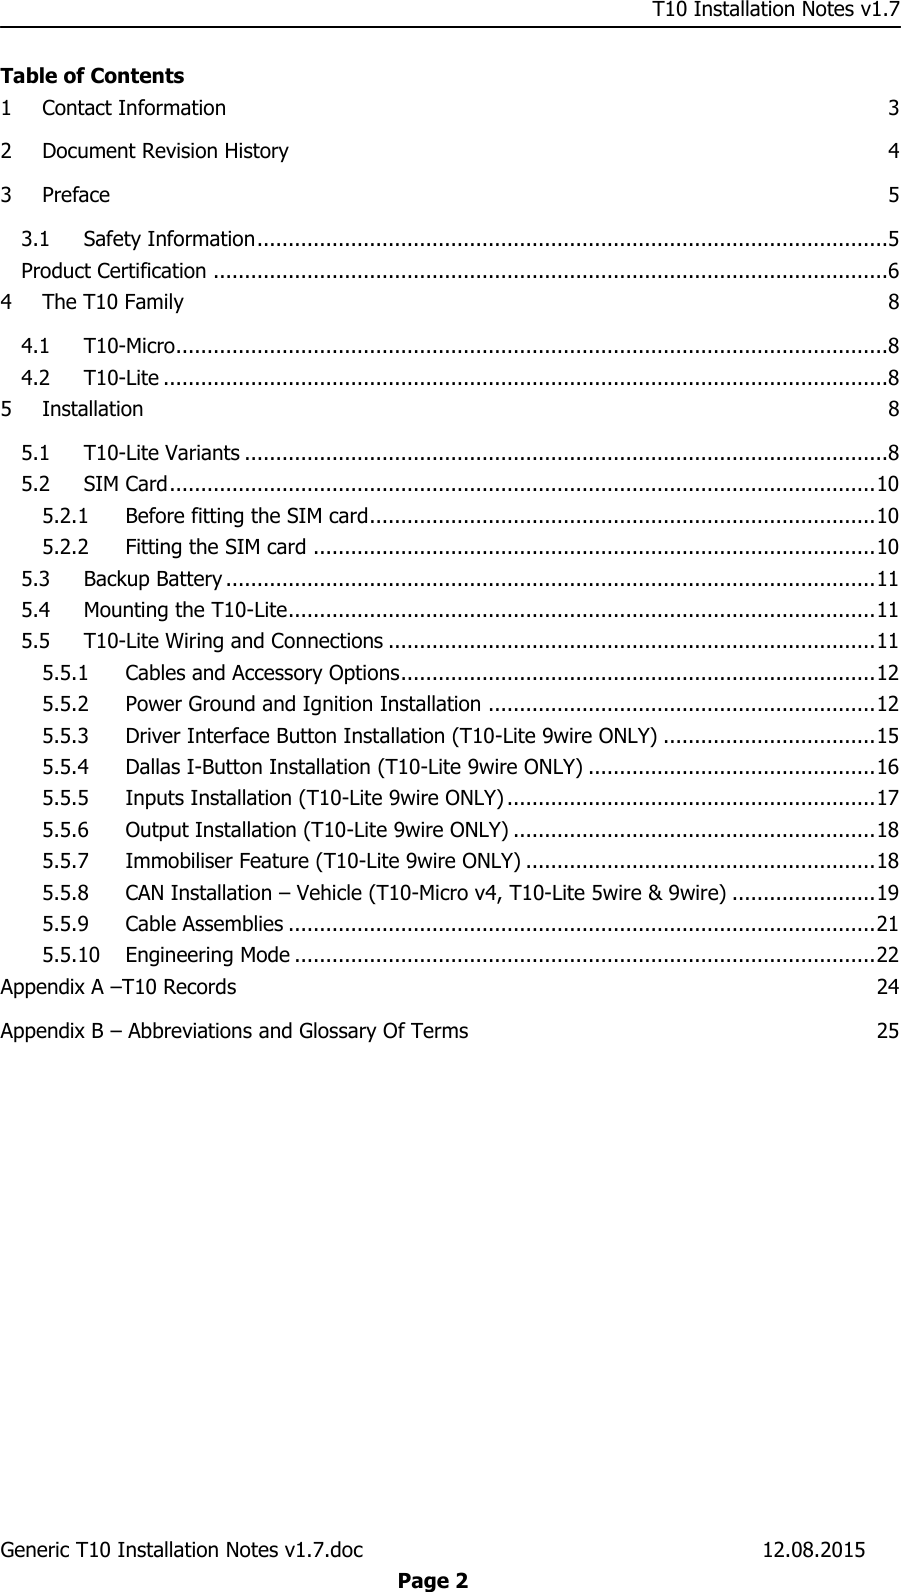     T10 Installation Notes v1.7 Generic T10 Installation Notes v1.7.doc    12.08.2015  Page 2 Table of Contents 1 Contact Information  3 2 Document Revision History  4 3 Preface  5 3.1 Safety Information .....................................................................................................5 Product Certification ............................................................................................................6 4 The T10 Family  8 4.1 T10-Micro..................................................................................................................8 4.2 T10-Lite ....................................................................................................................8 5 Installation  8 5.1 T10-Lite Variants .......................................................................................................8 5.2 SIM Card ................................................................................................................. 10 5.2.1 Before fitting the SIM card ................................................................................. 10 5.2.2 Fitting the SIM card .......................................................................................... 10 5.3 Backup Battery ........................................................................................................ 11 5.4 Mounting the T10-Lite .............................................................................................. 11 5.5 T10-Lite Wiring and Connections .............................................................................. 11 5.5.1 Cables and Accessory Options ............................................................................ 12 5.5.2 Power Ground and Ignition Installation .............................................................. 12 5.5.3 Driver Interface Button Installation (T10-Lite 9wire ONLY) .................................. 15 5.5.4 Dallas I-Button Installation (T10-Lite 9wire ONLY) .............................................. 16 5.5.5 Inputs Installation (T10-Lite 9wire ONLY) ........................................................... 17 5.5.6 Output Installation (T10-Lite 9wire ONLY) .......................................................... 18 5.5.7 Immobiliser Feature (T10-Lite 9wire ONLY) ........................................................ 18 5.5.8 CAN Installation – Vehicle (T10-Micro v4, T10-Lite 5wire &amp; 9wire) ....................... 19 5.5.9 Cable Assemblies .............................................................................................. 21 5.5.10 Engineering Mode ............................................................................................. 22 Appendix A –T10 Records  24 Appendix B – Abbreviations and Glossary Of Terms  25  